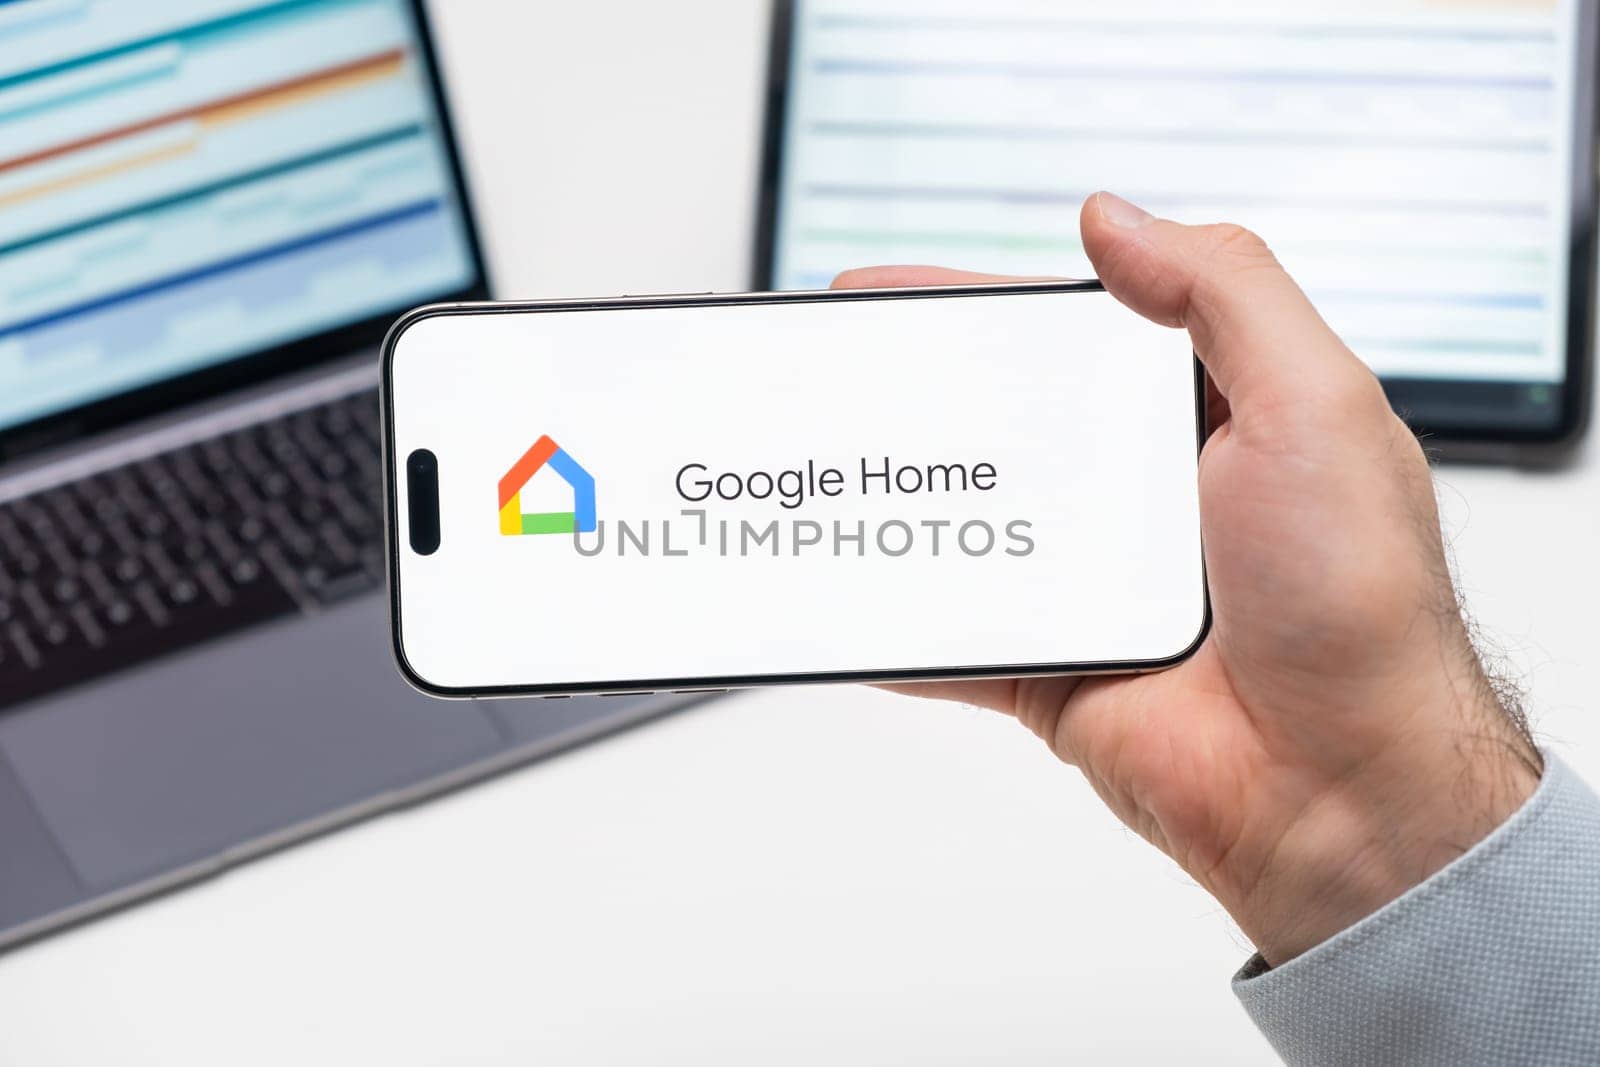 Google home application logo on the screen of smart phone in mans hand, laptop and tablet are on the table in the background, December 2023, Prague, Czech Republic.